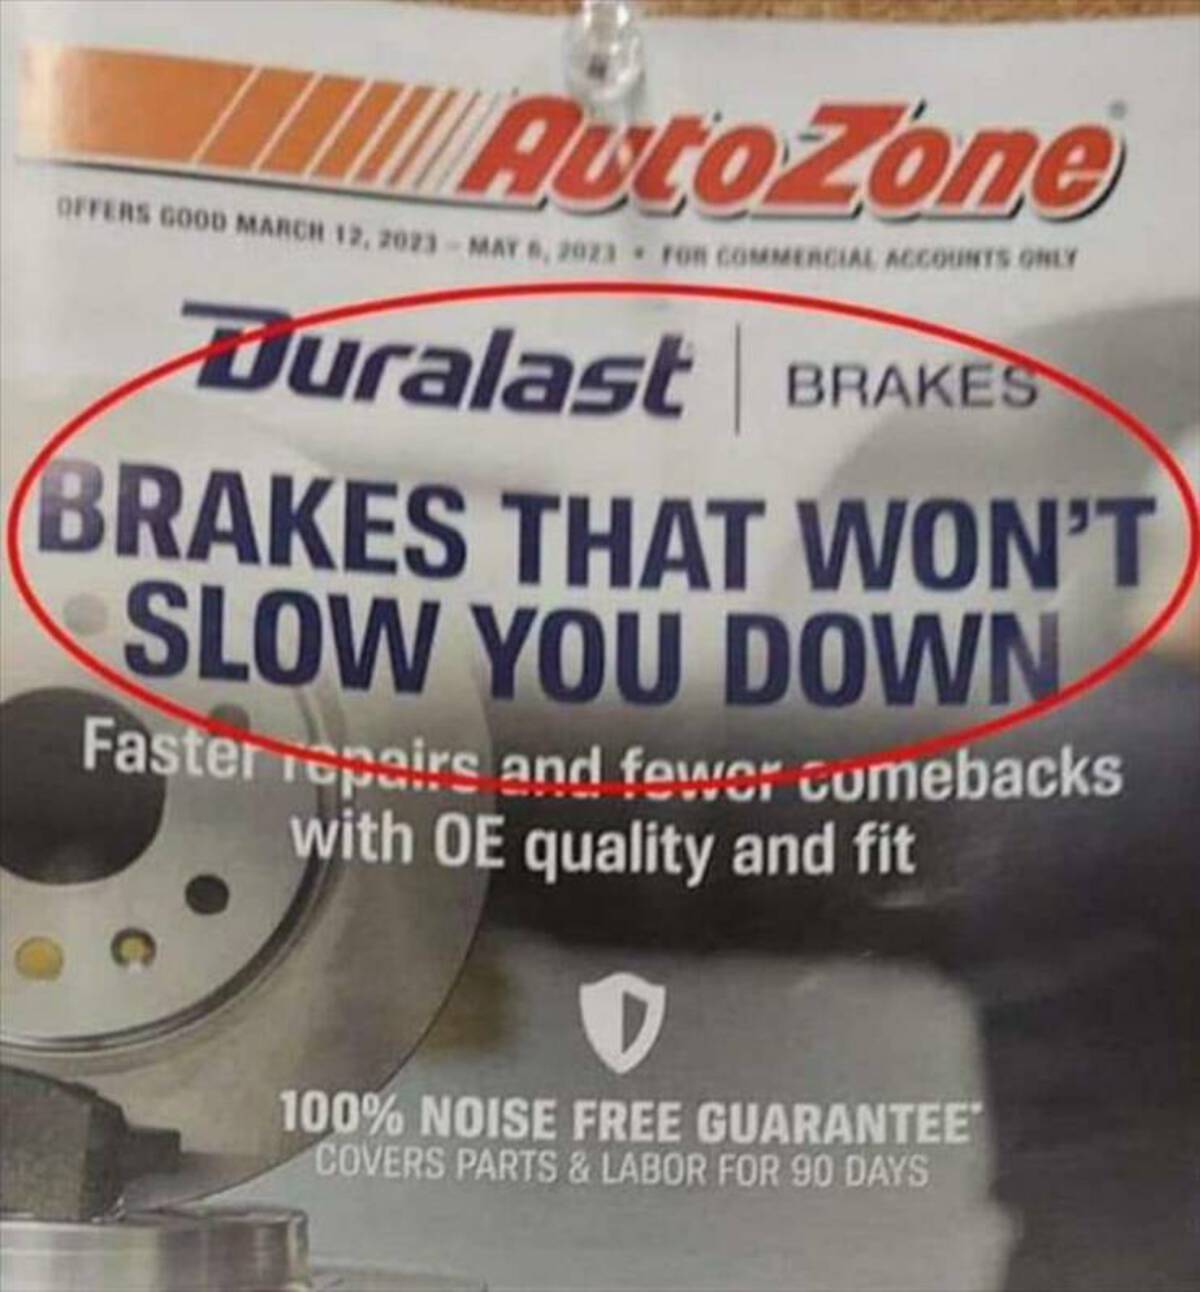 cool random pics - autozone brake meme - AutoZone Offers Good For Commercial Accounts Only Duralast Brakes Brakes That Won'T Slow You Down Faster repairs and fewer cumebacks with Oe quality and fit 100% Noise Free Guarantee Covers Parts & Labor For 90 Day